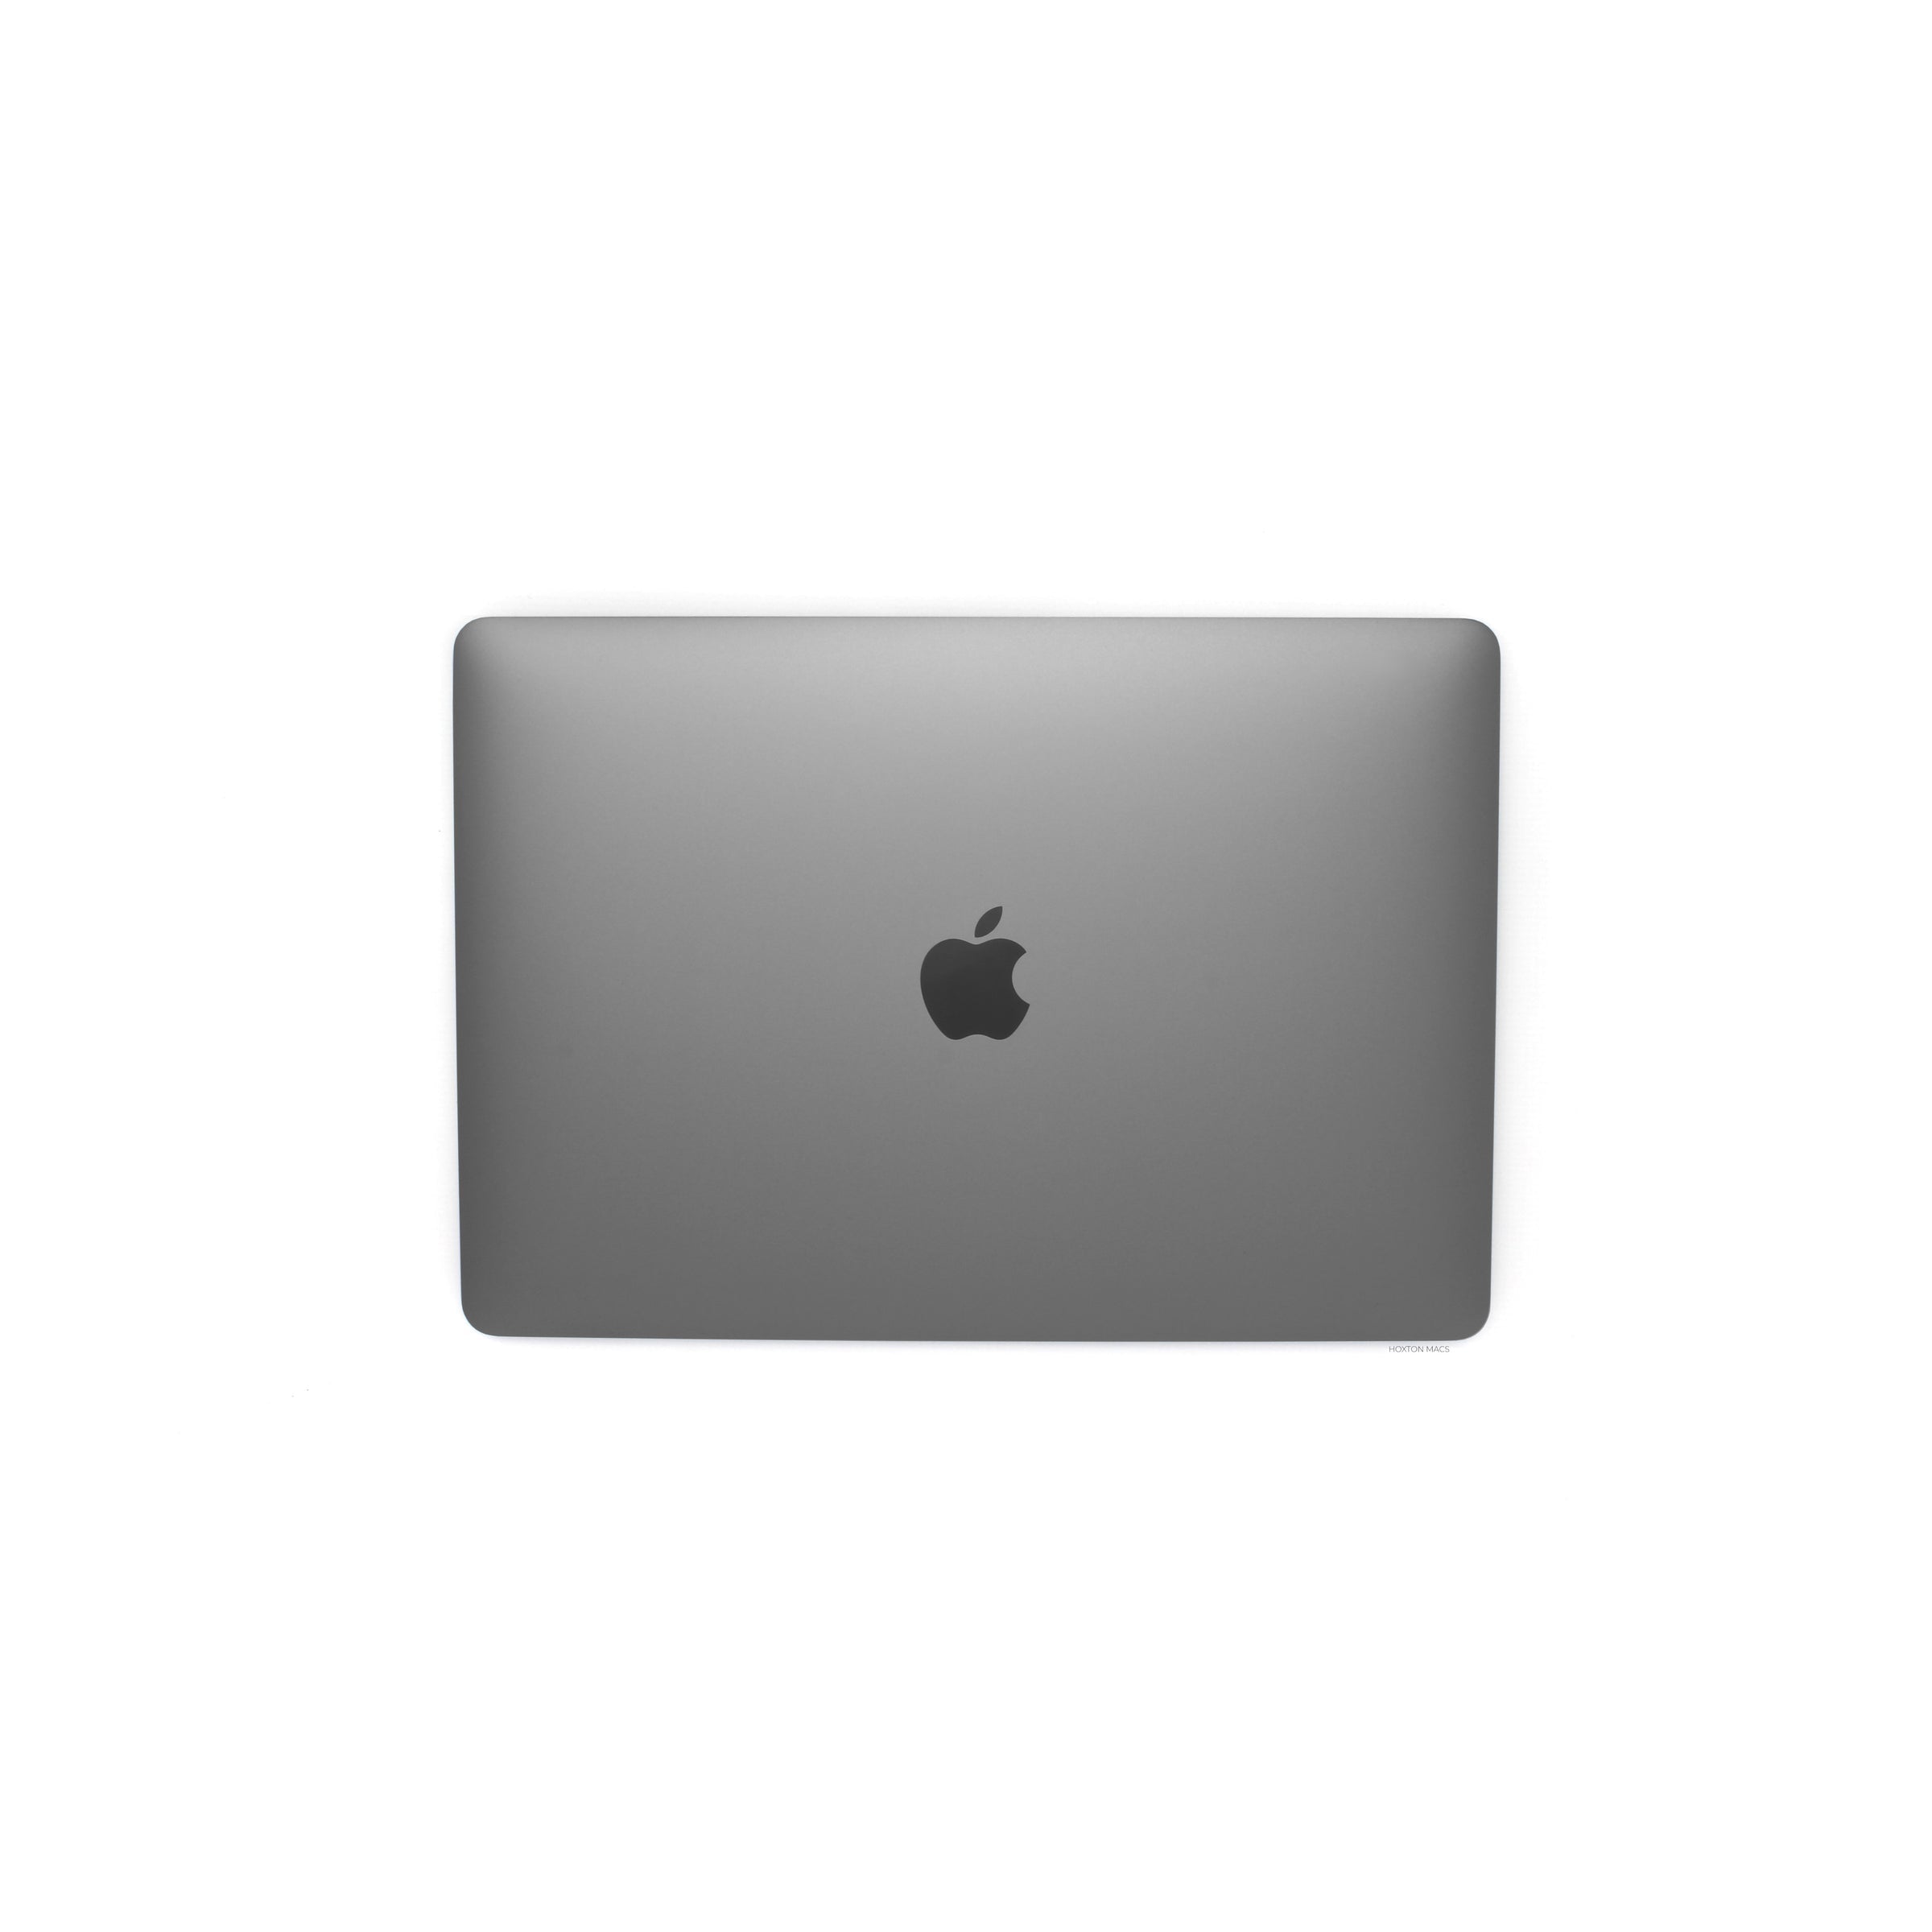 Apple MacBook Pro 13.3" MWP42LL/A (2020) Intel Core i5. 16GB RAM, 512GB, Space Grey with Touch Bar